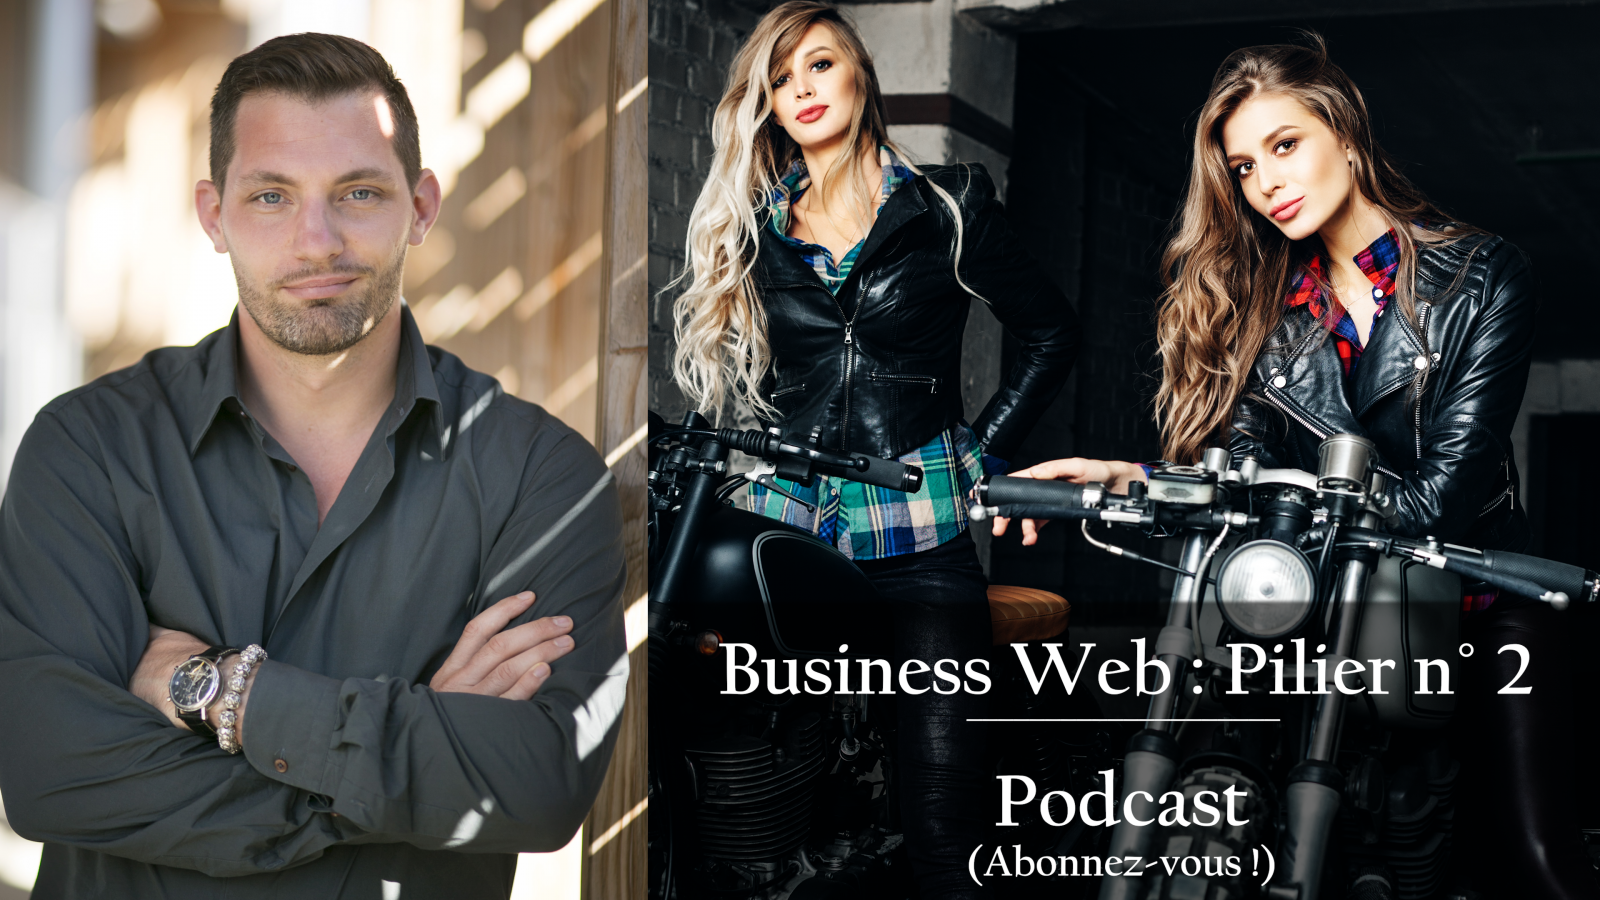 11eme Podcast - Business Web : Pilier n°2